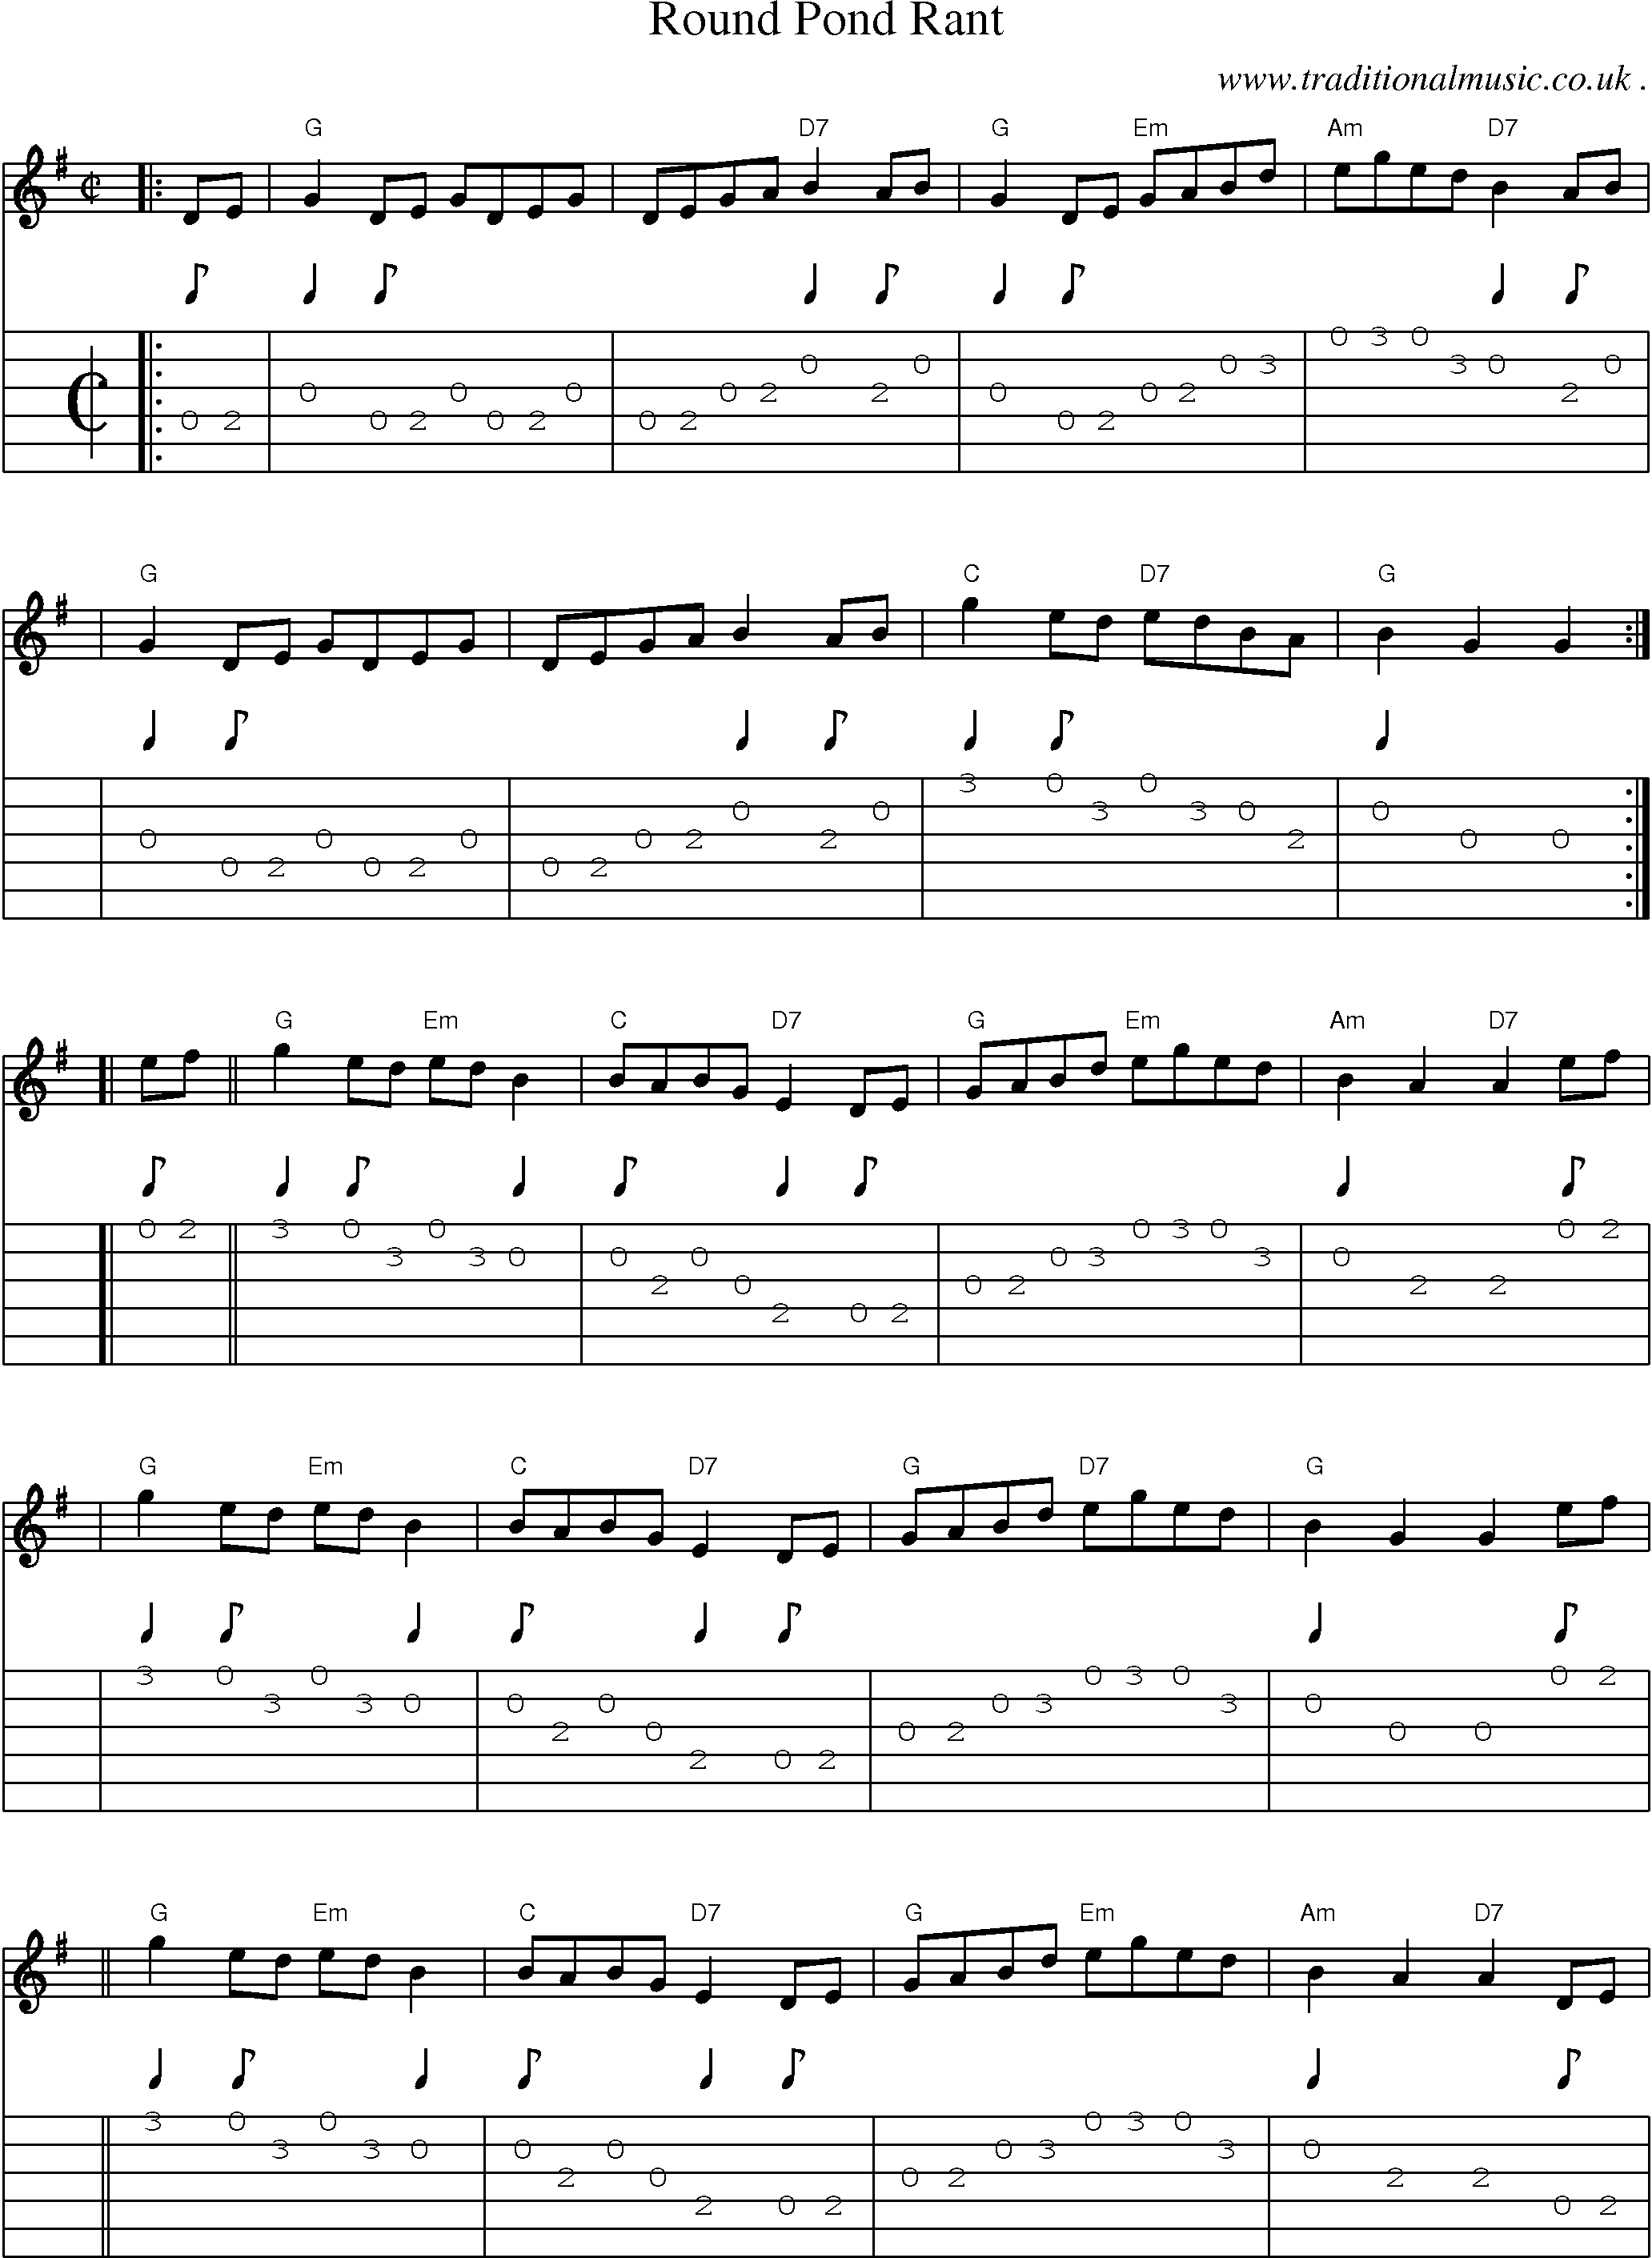 Sheet-music  score, Chords and Guitar Tabs for Round Pond Rant